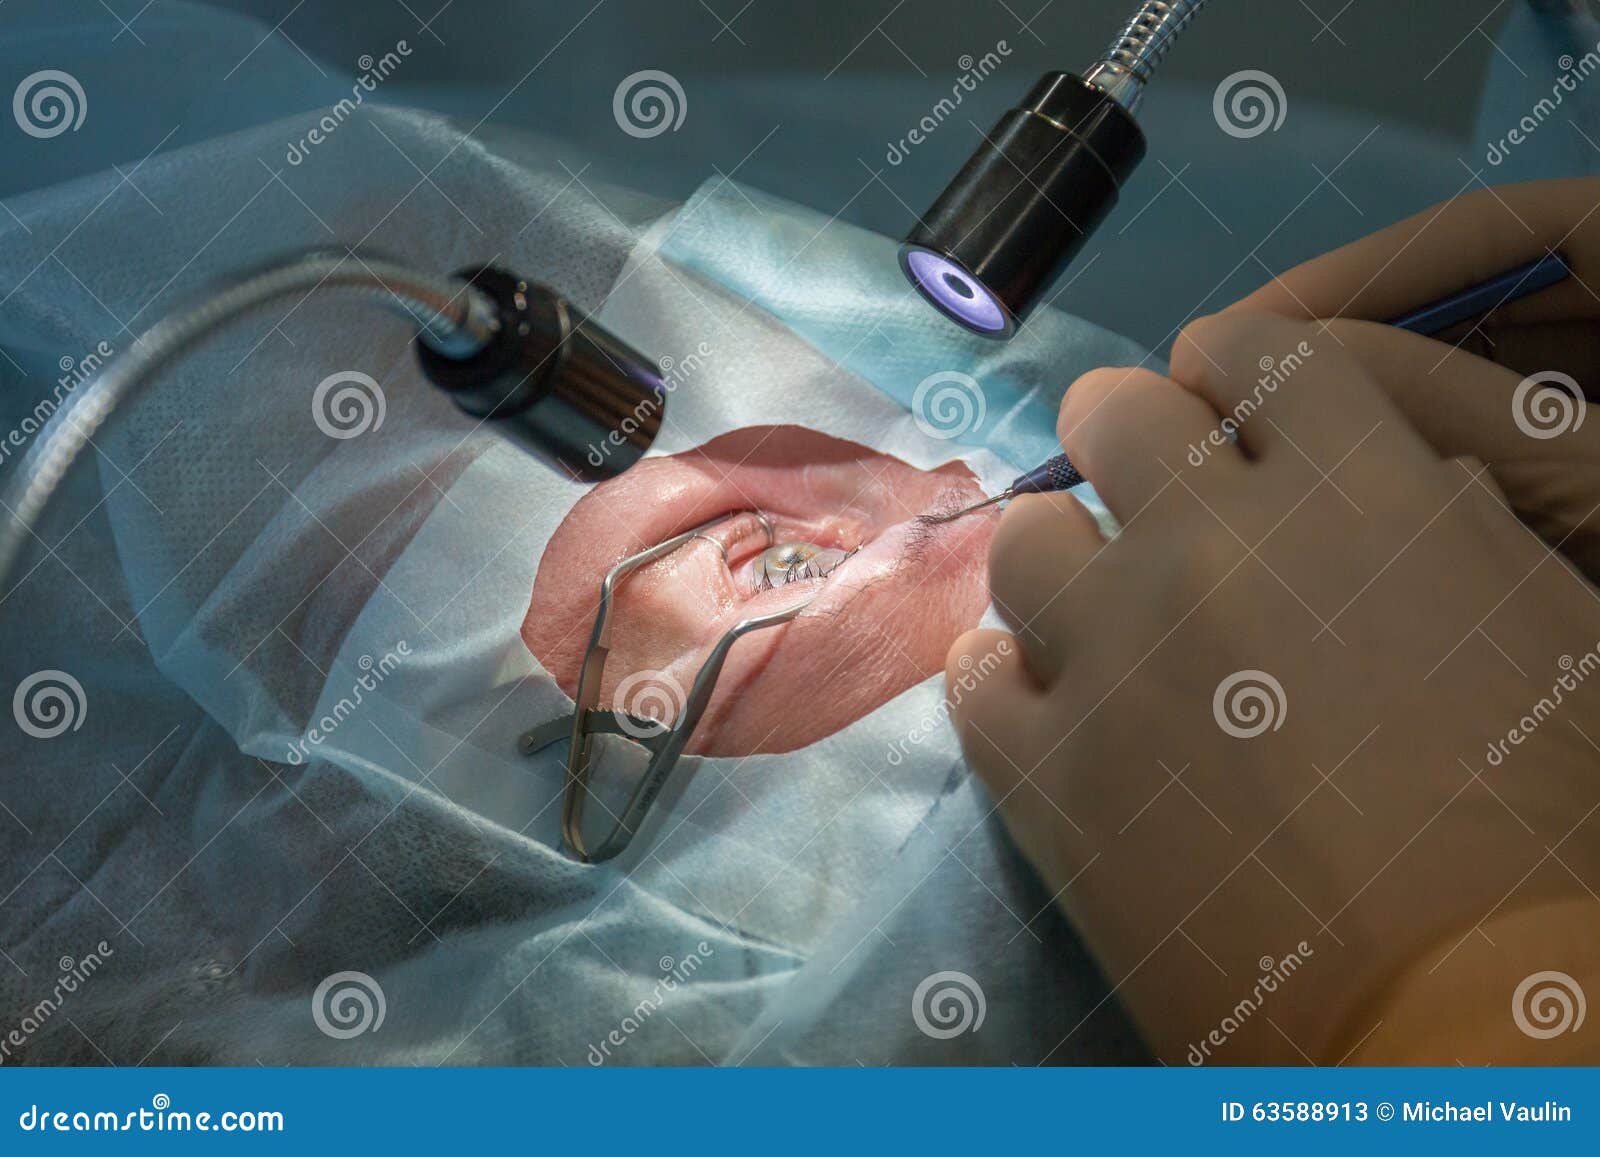 Opthtalmology Laser Operation Editorial Stock Photo - Image of operation, 63588913